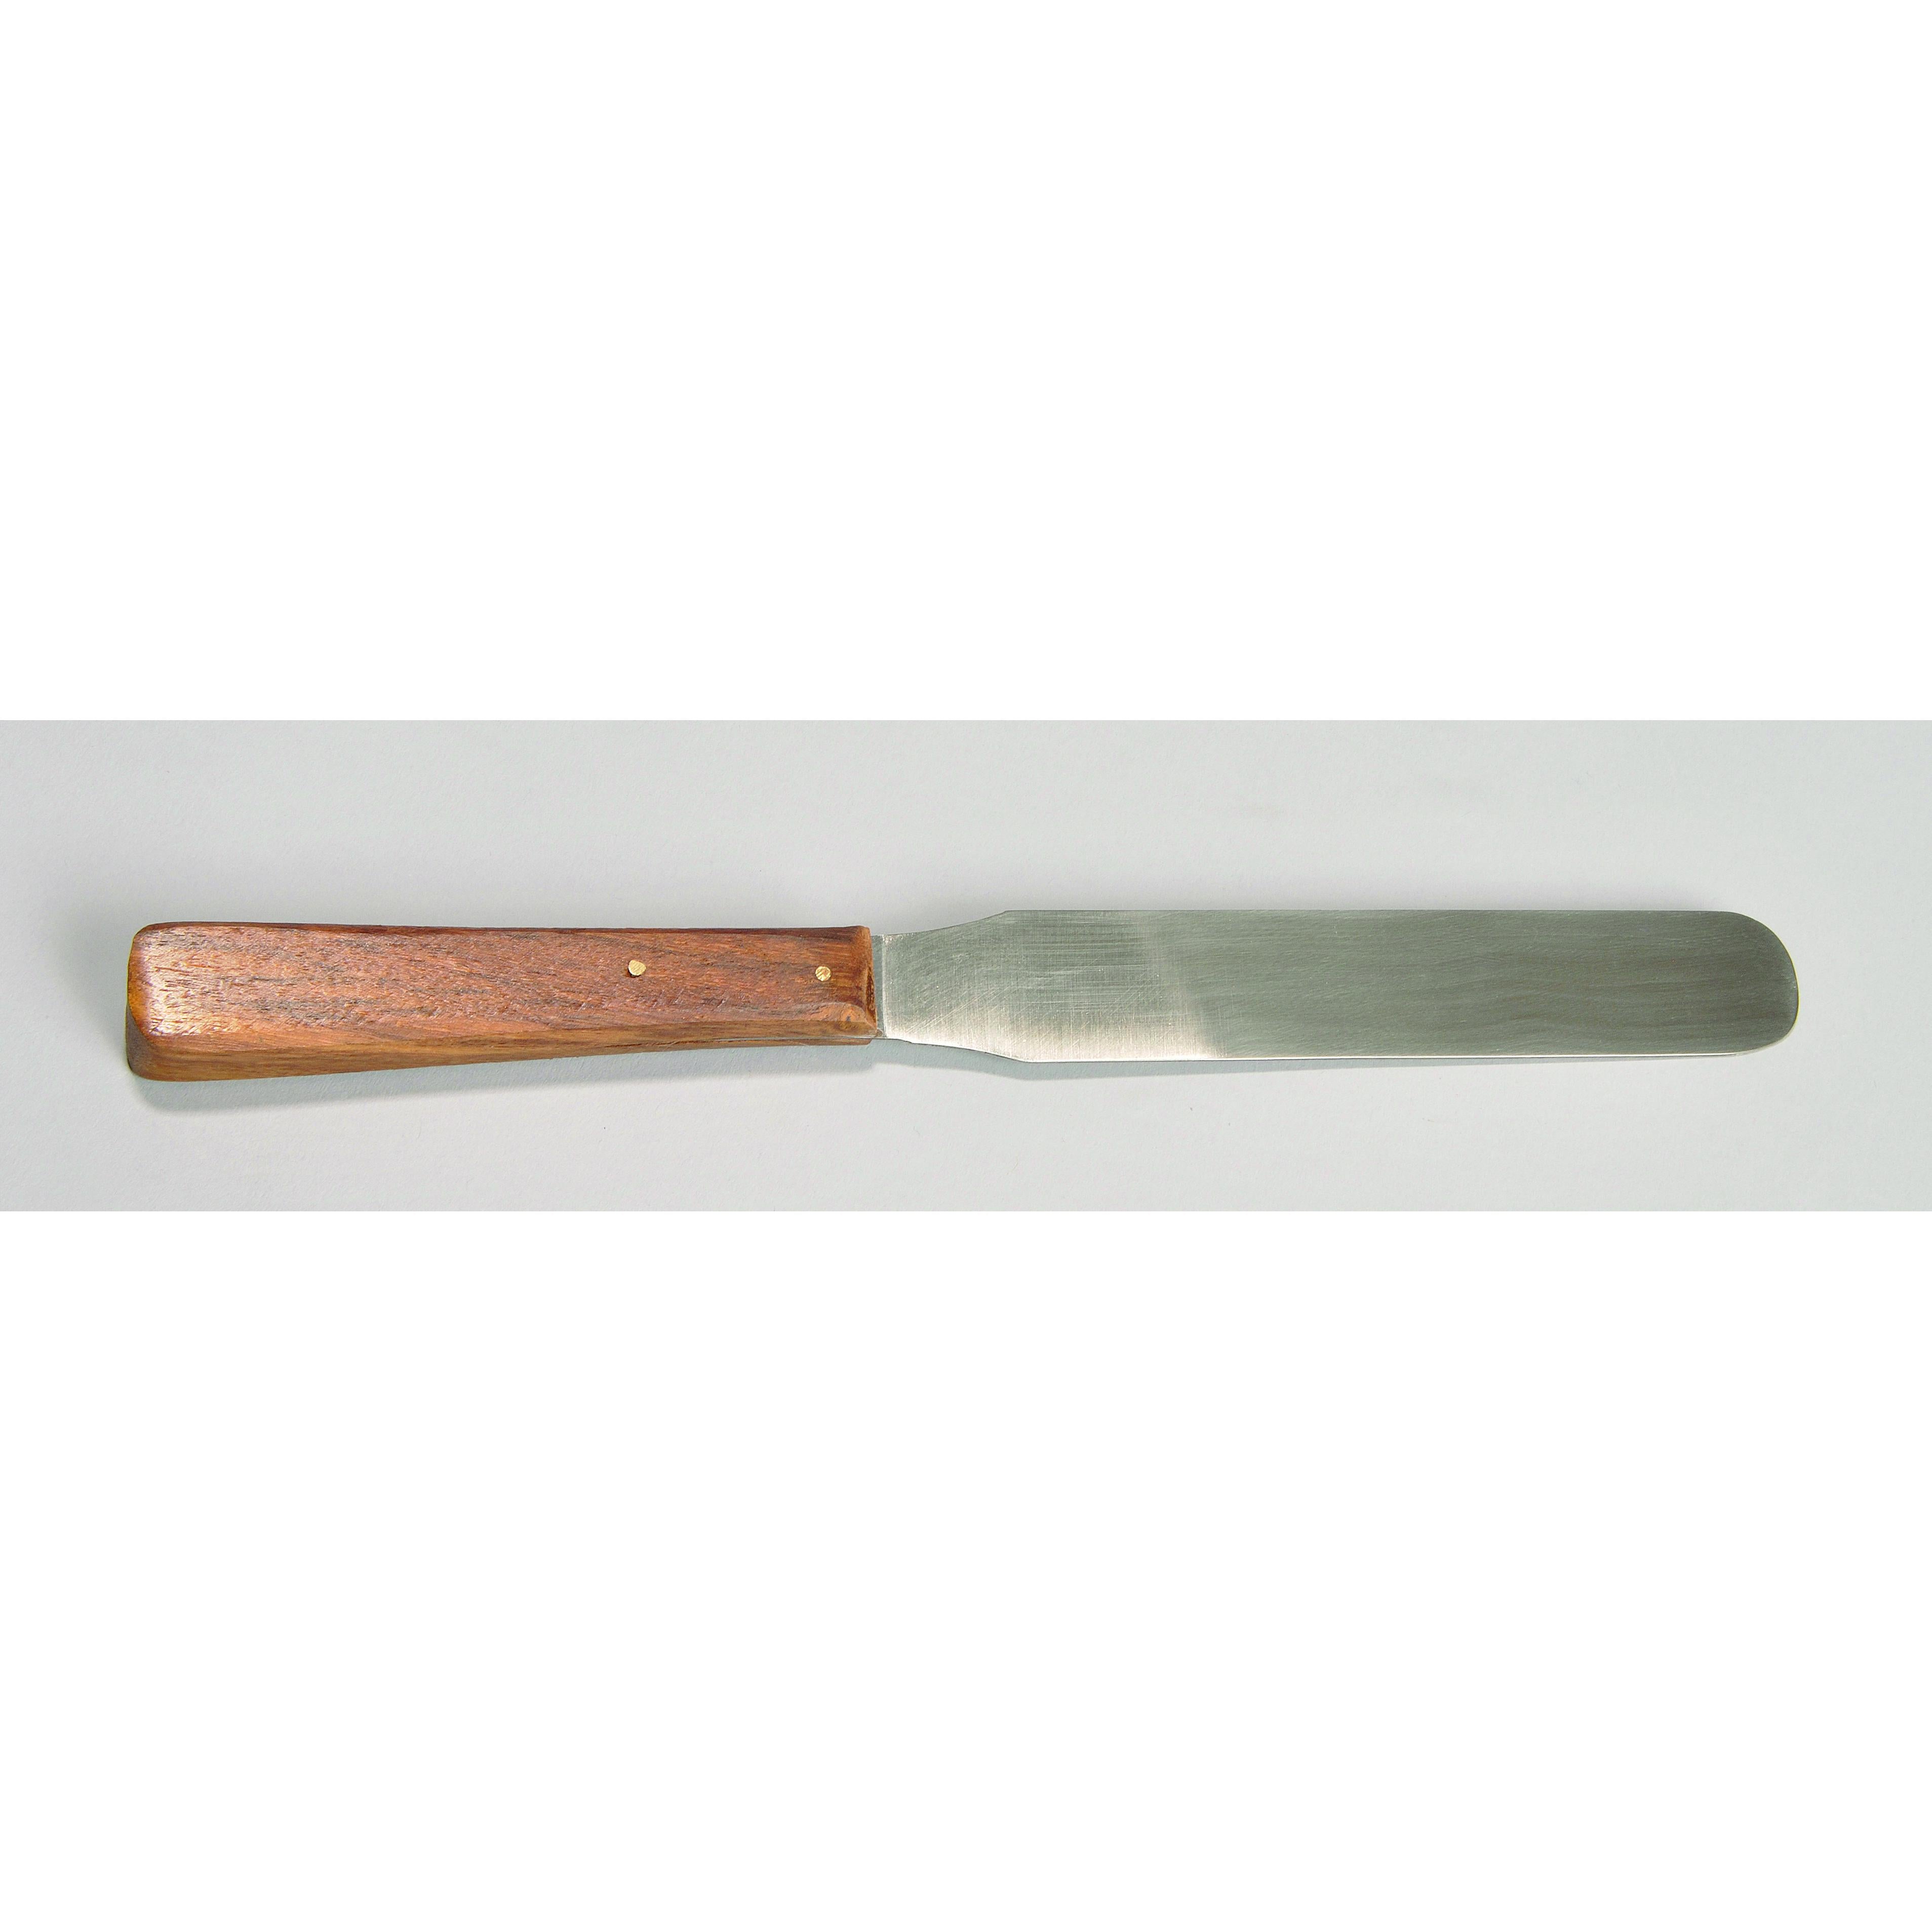 Spatula, Stainless Steel with Wooden Handle